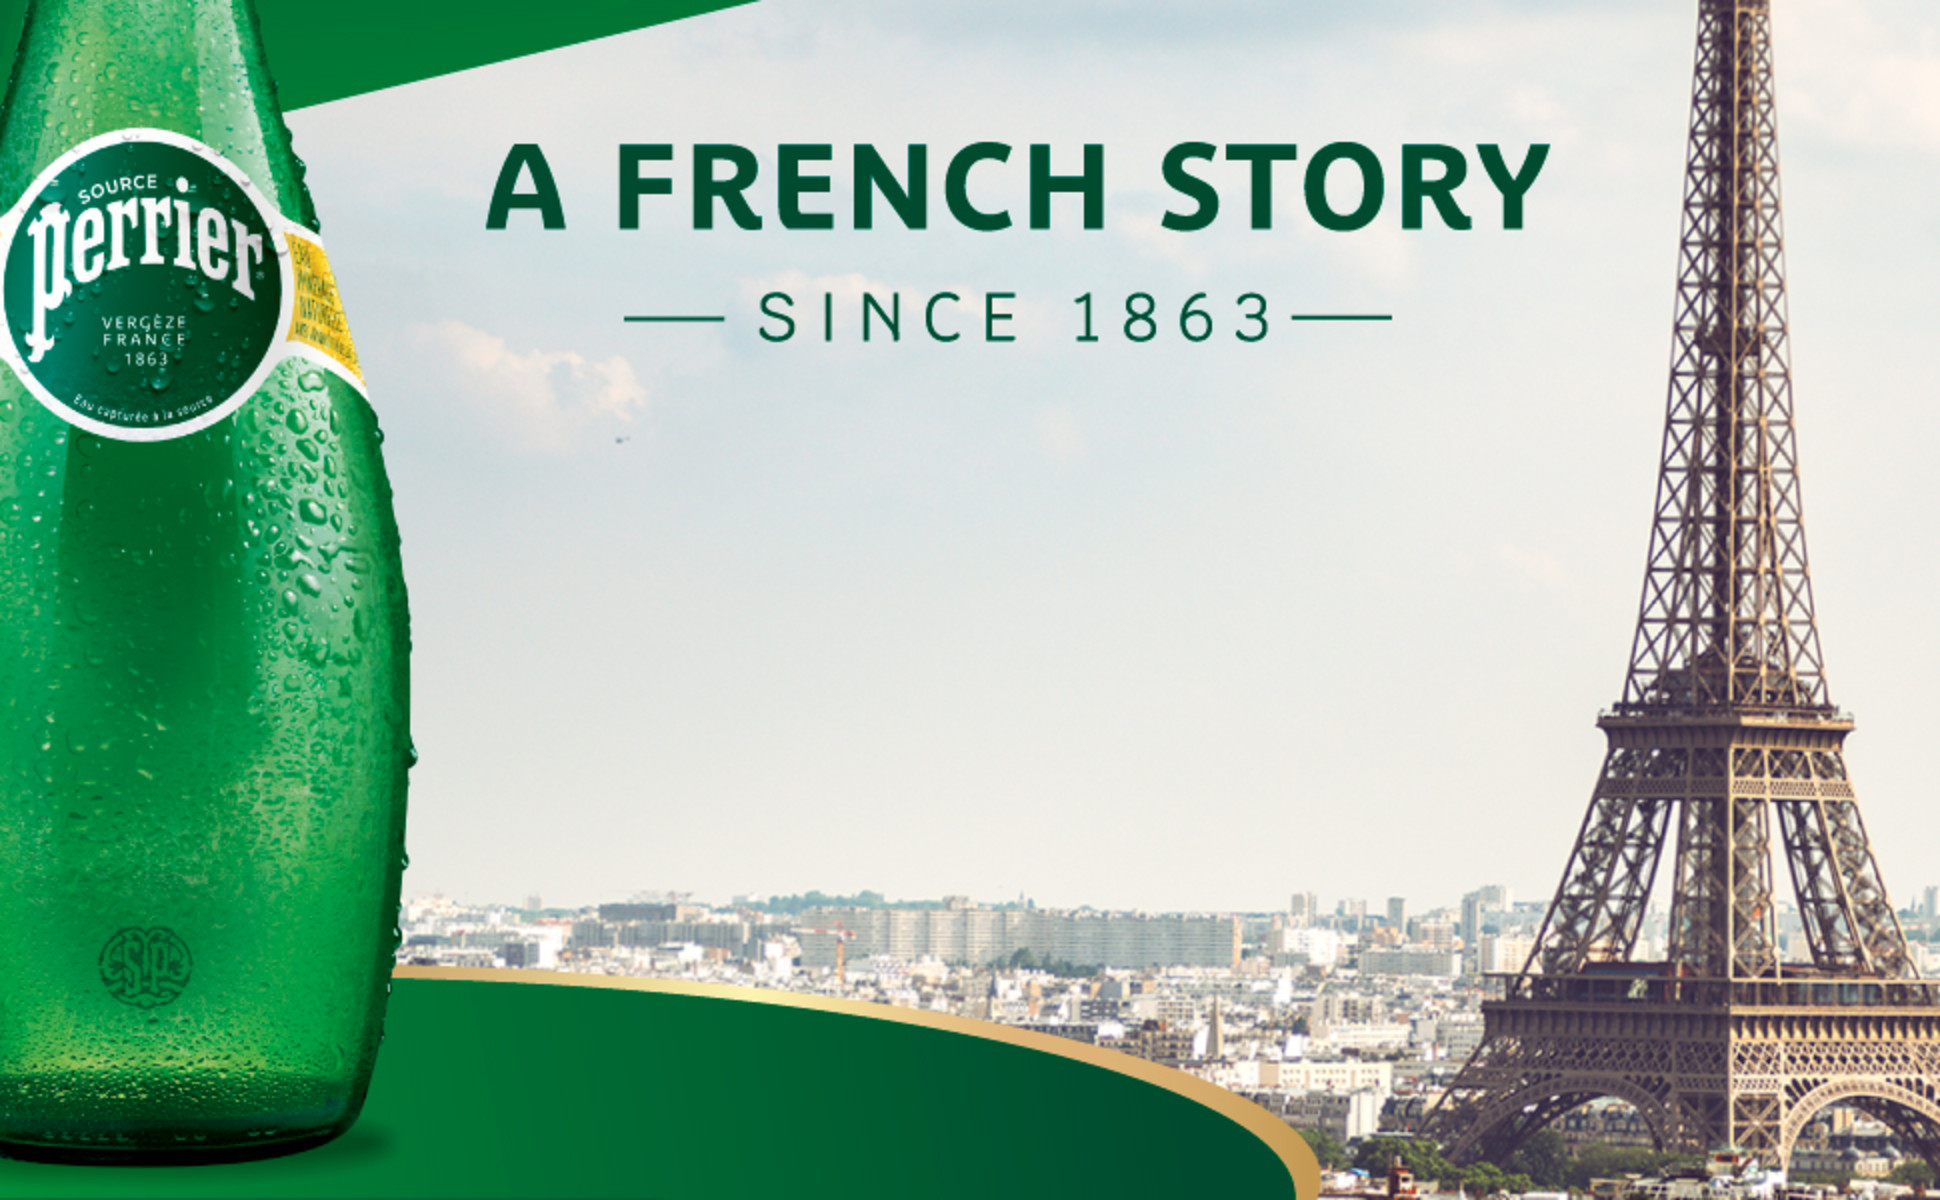 Green mineral water bottle with Eiffel Tower. Perrier has been a  French story since 1863.